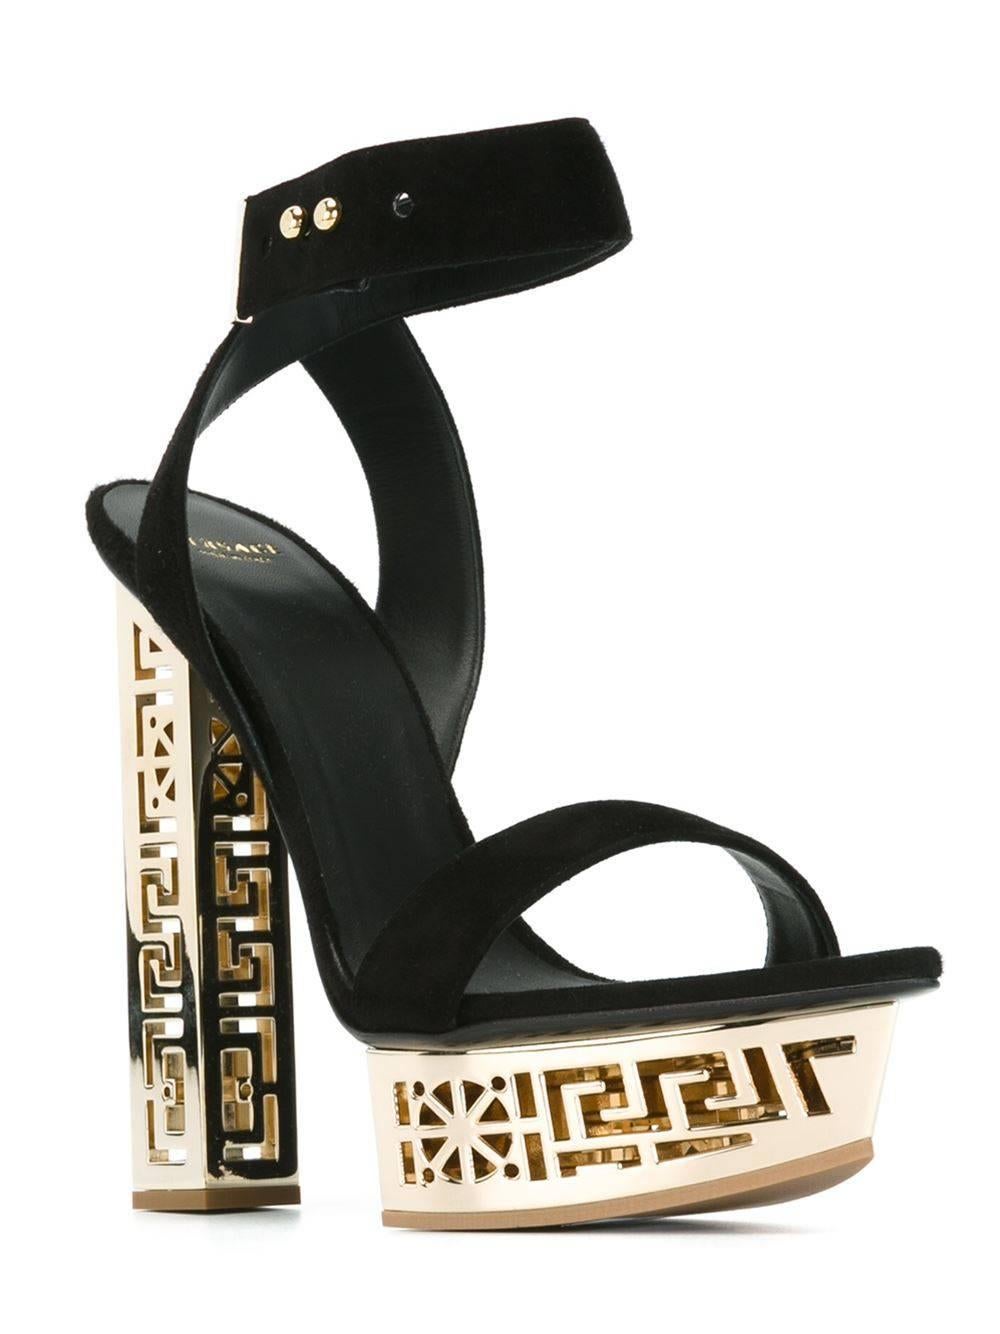 VERSACE SANDALS

Get a stylish lift with these sandals featuring a #GREEK motif metallic heel and platform. 

They combine Italian craftsmanship and daring Versace design. 

Suede

Metallic heel and platform

Made in Italy.

IT Size 41 - US 11

New,